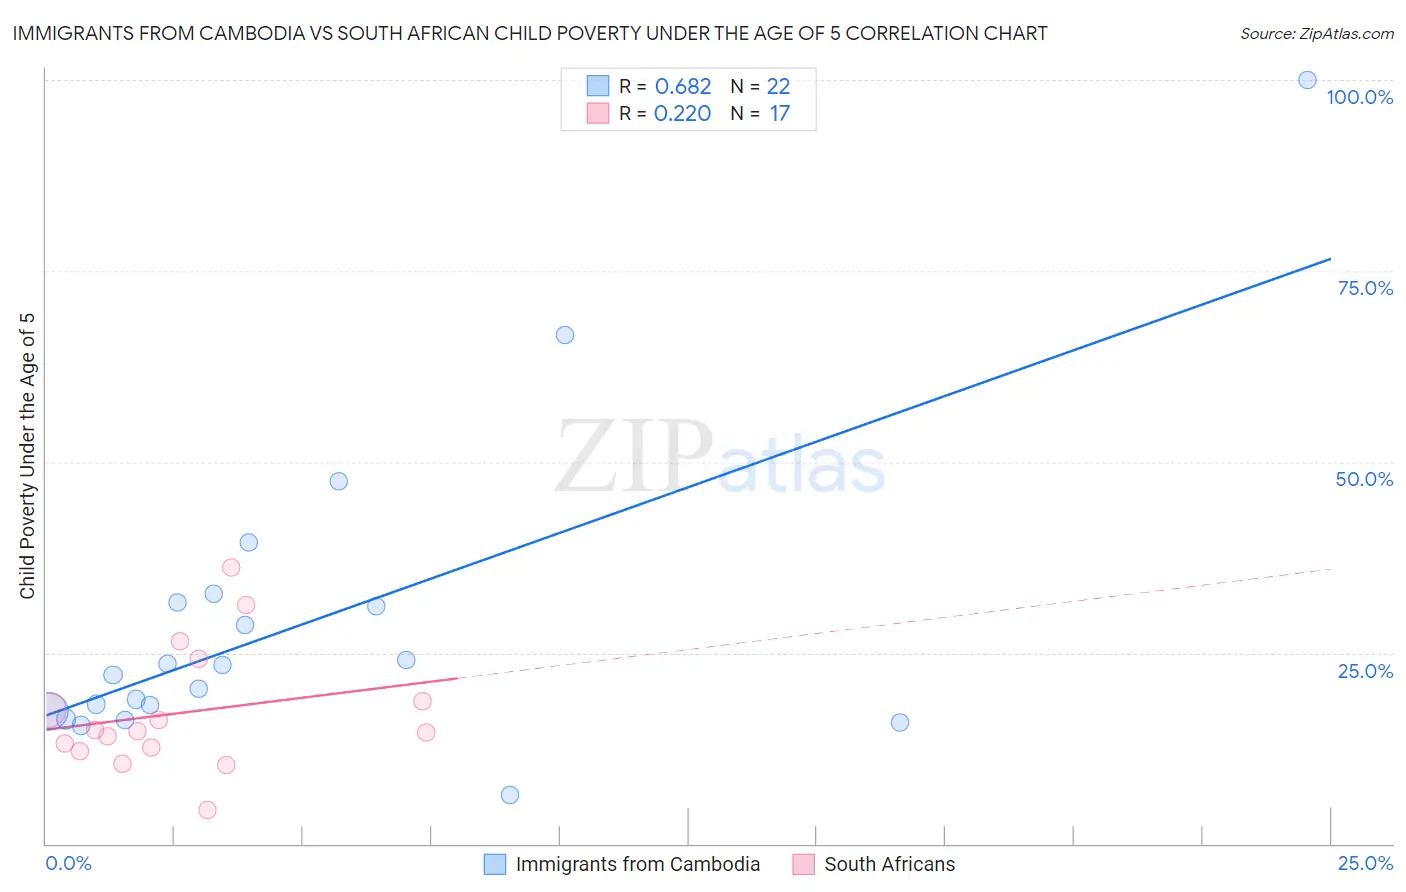 Immigrants from Cambodia vs South African Child Poverty Under the Age of 5